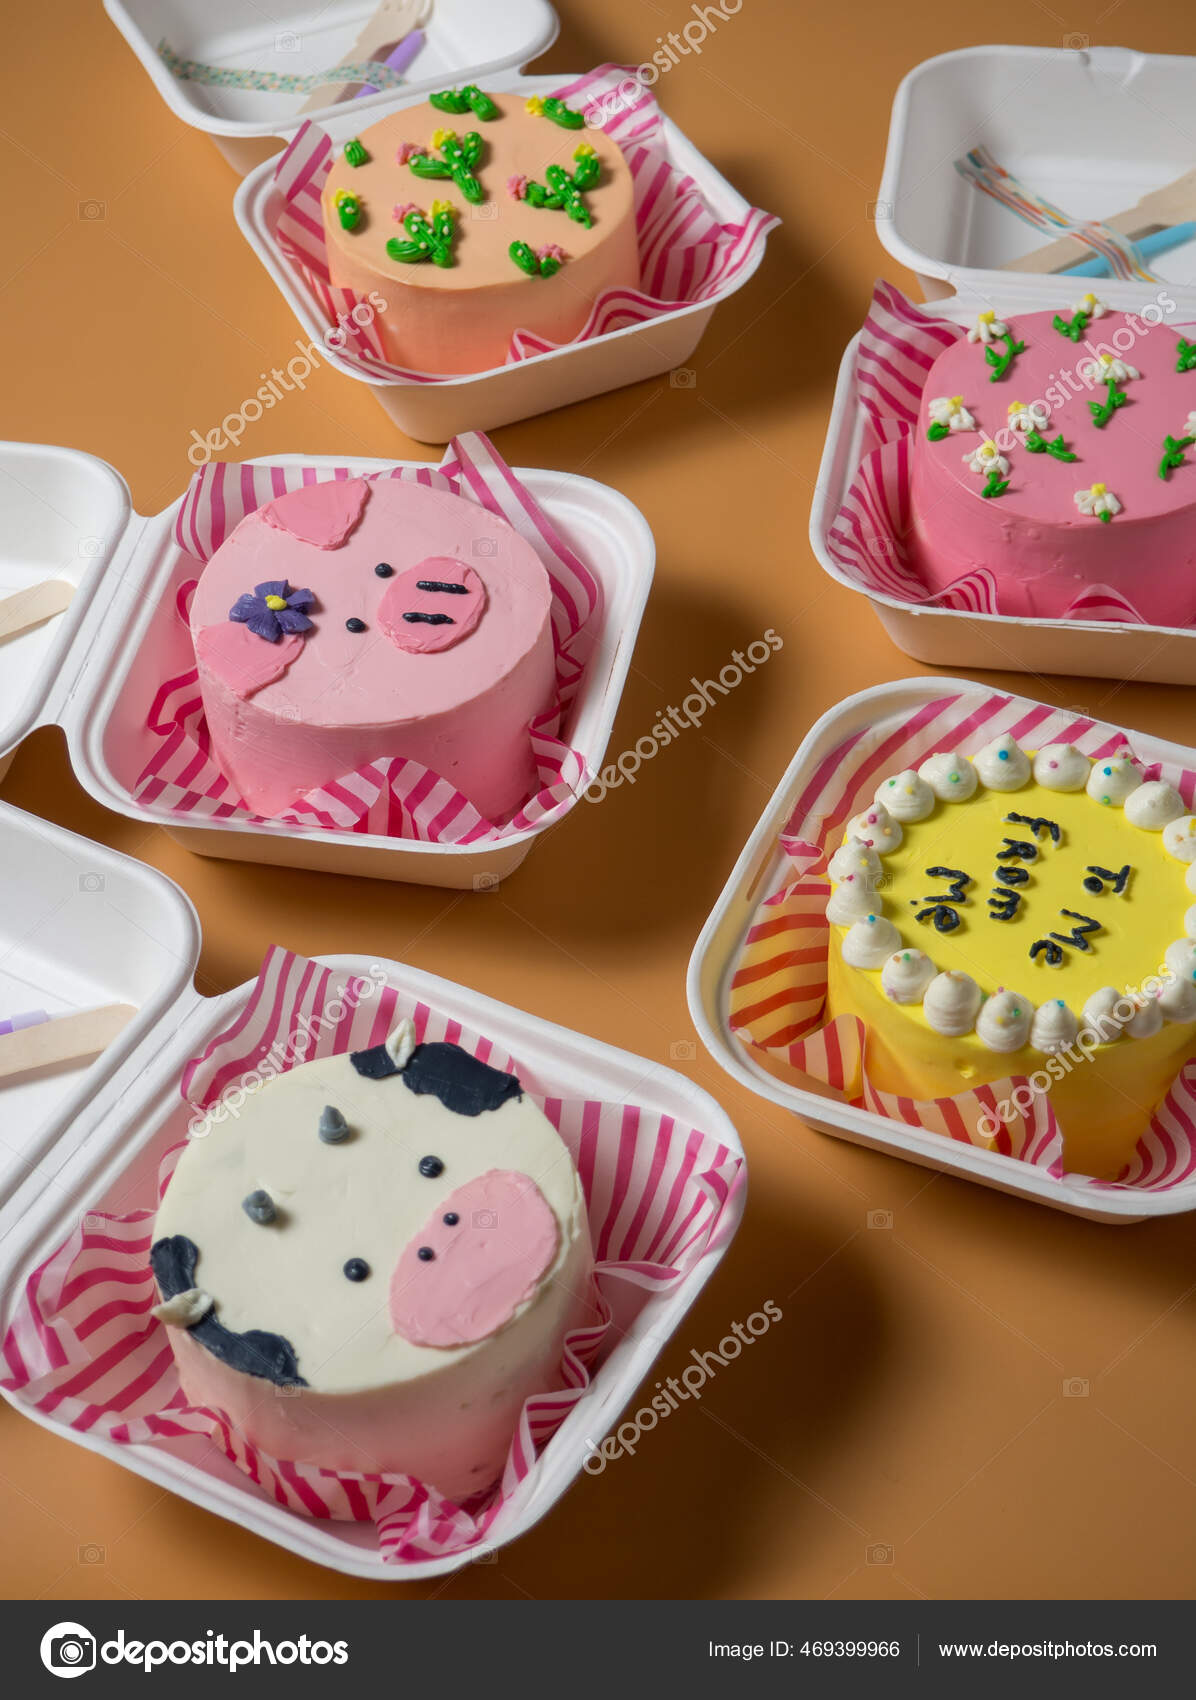 Lots Little Colorful Cakes Boxes Orange Background Korean Lunch